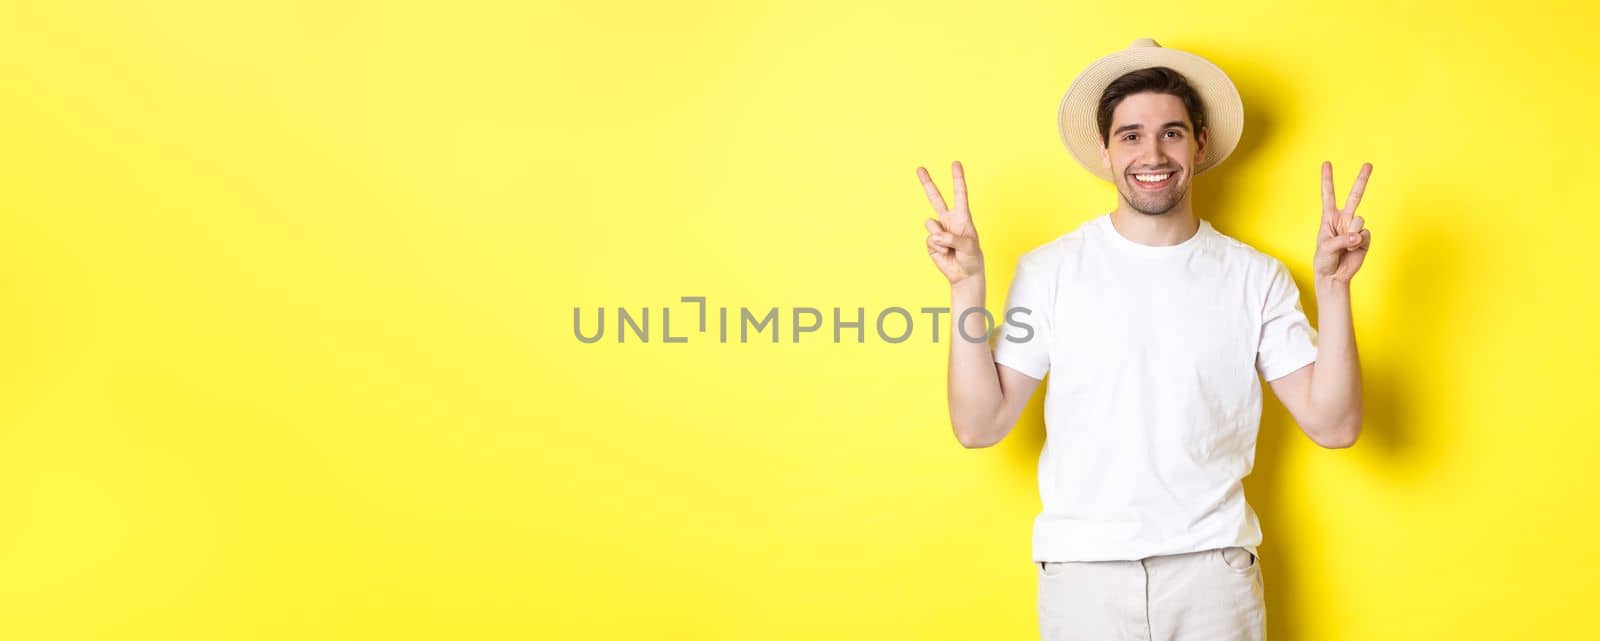 Concept of tourism and vacation. Happy male tourist posing for photo with peace signs, smiling excited, standing against yellow background.